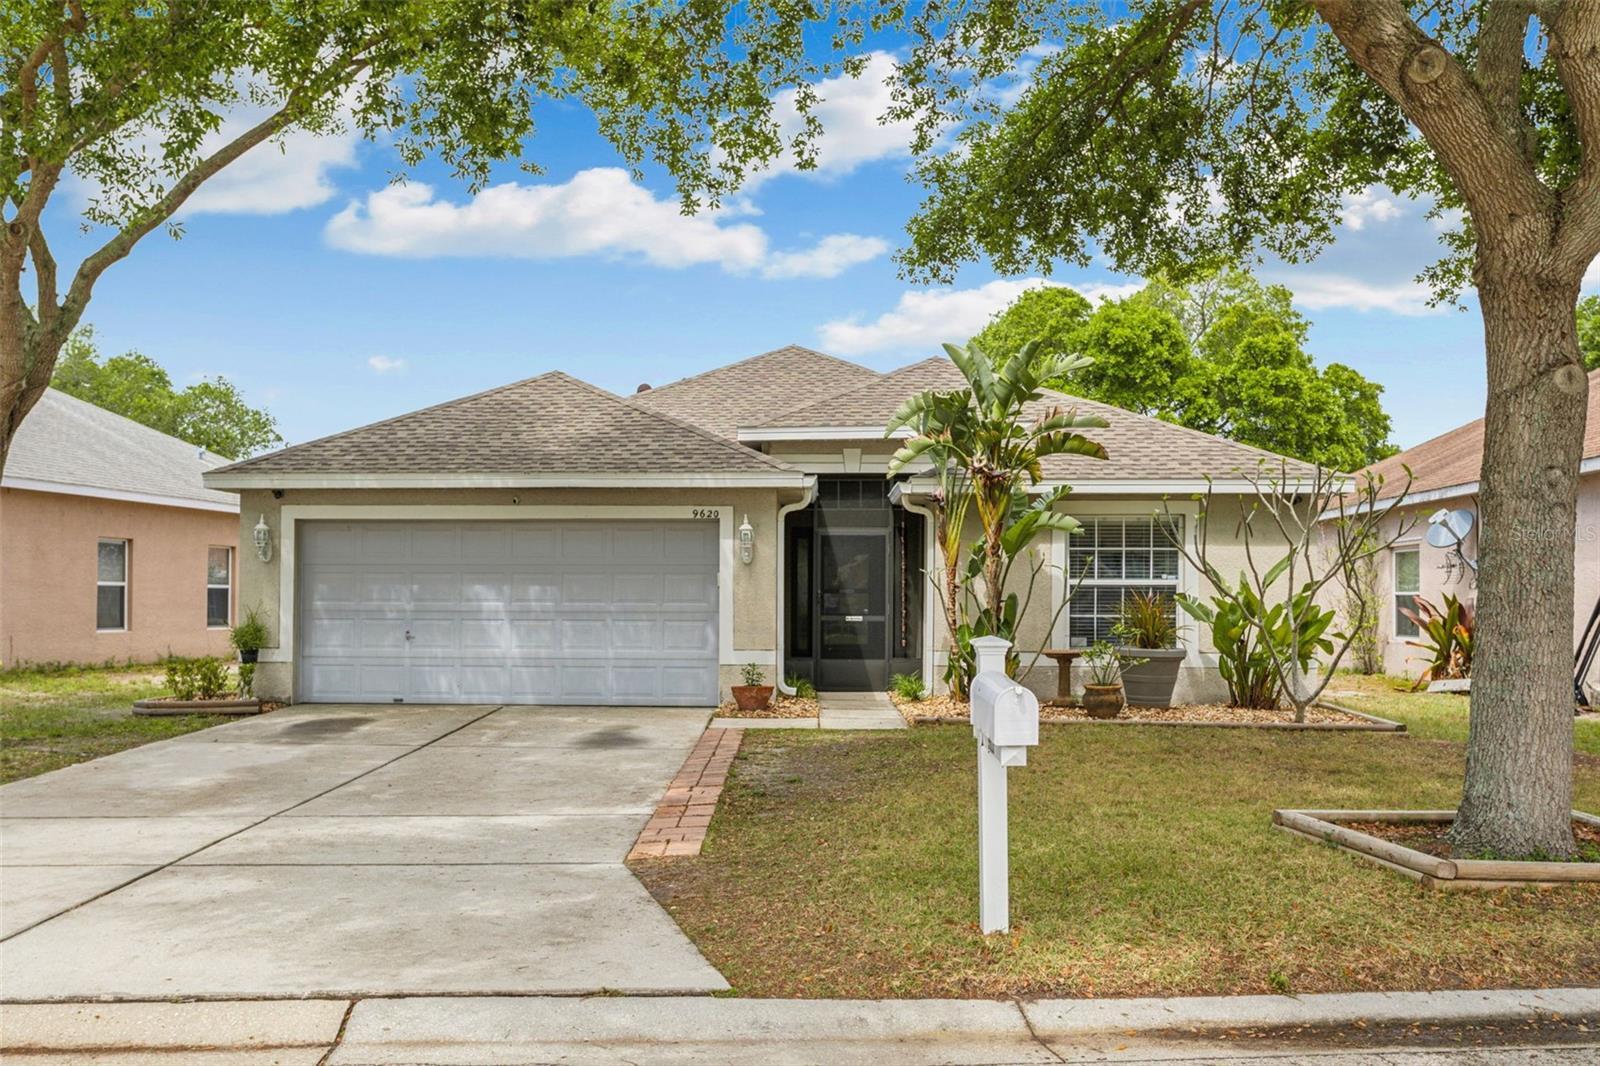 Photo one of 9620 Cypress Harbor Dr Gibsonton FL 33534 | MLS T3512511